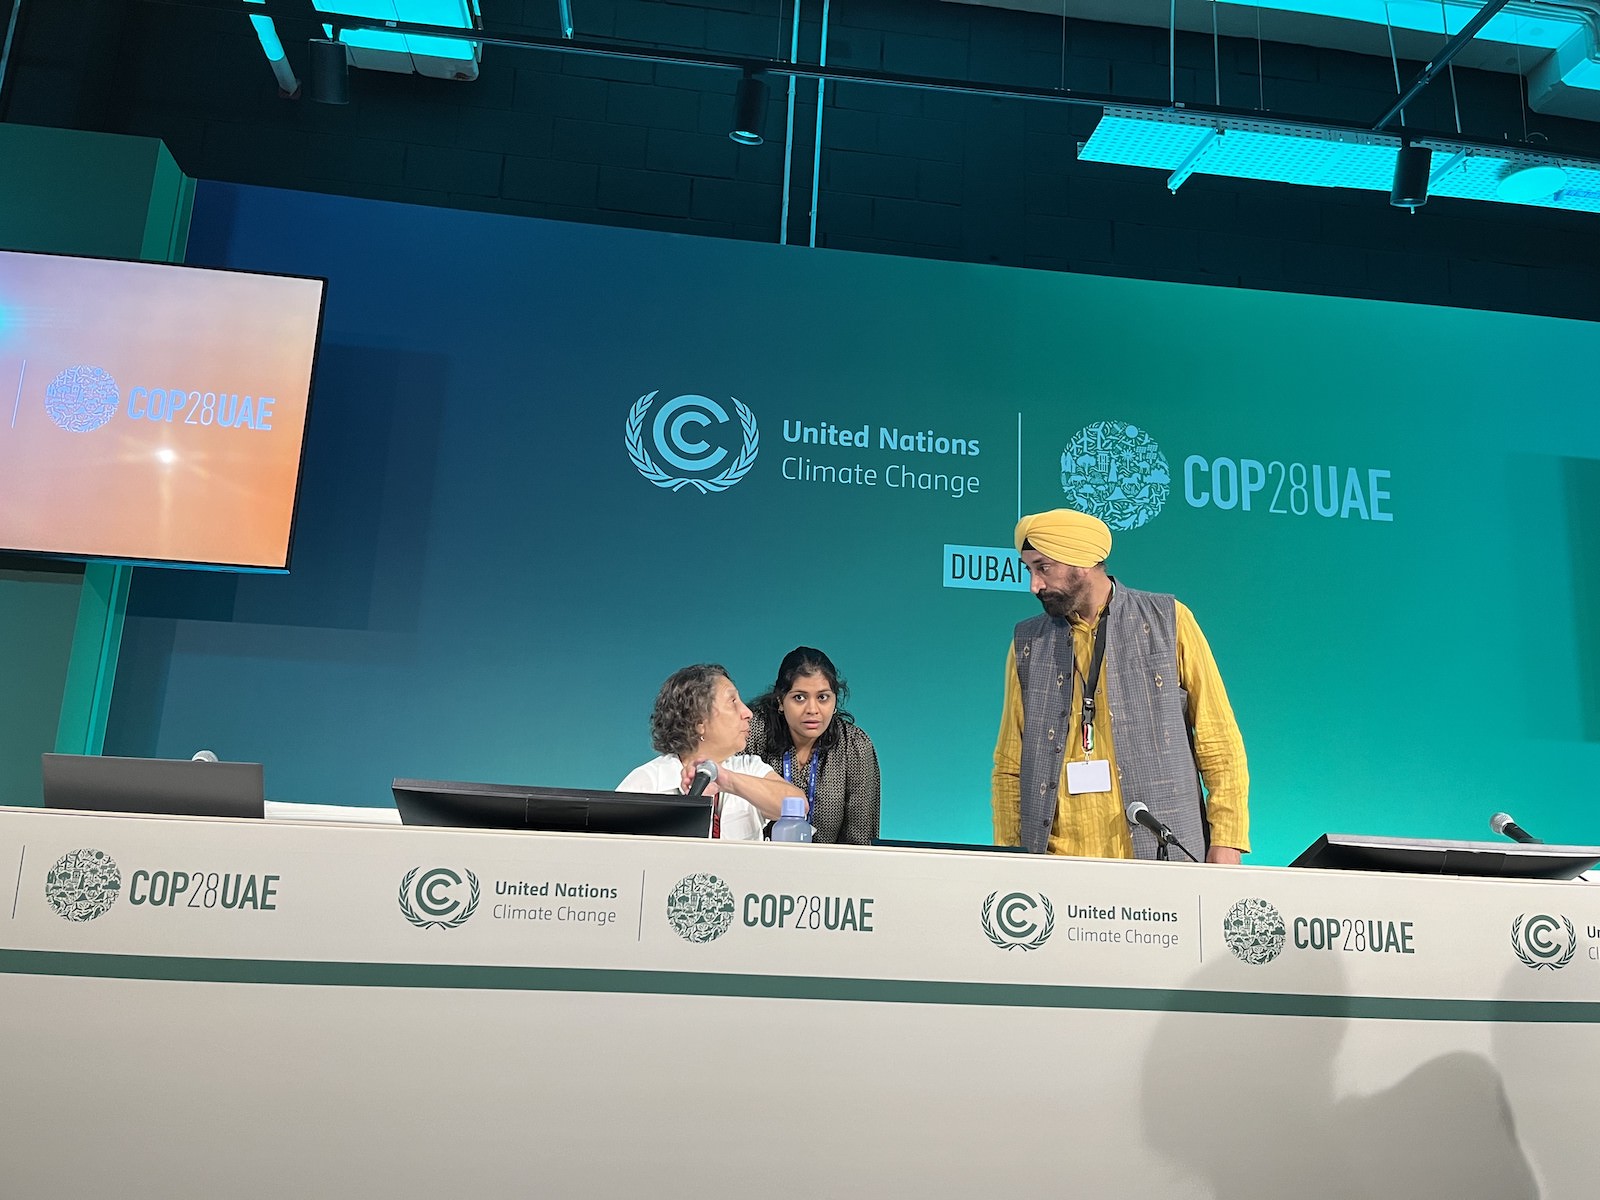 A man in a yellow turban and shirt stands behind a long table marked with COP28UAE. He is looking at two women also behind the table.